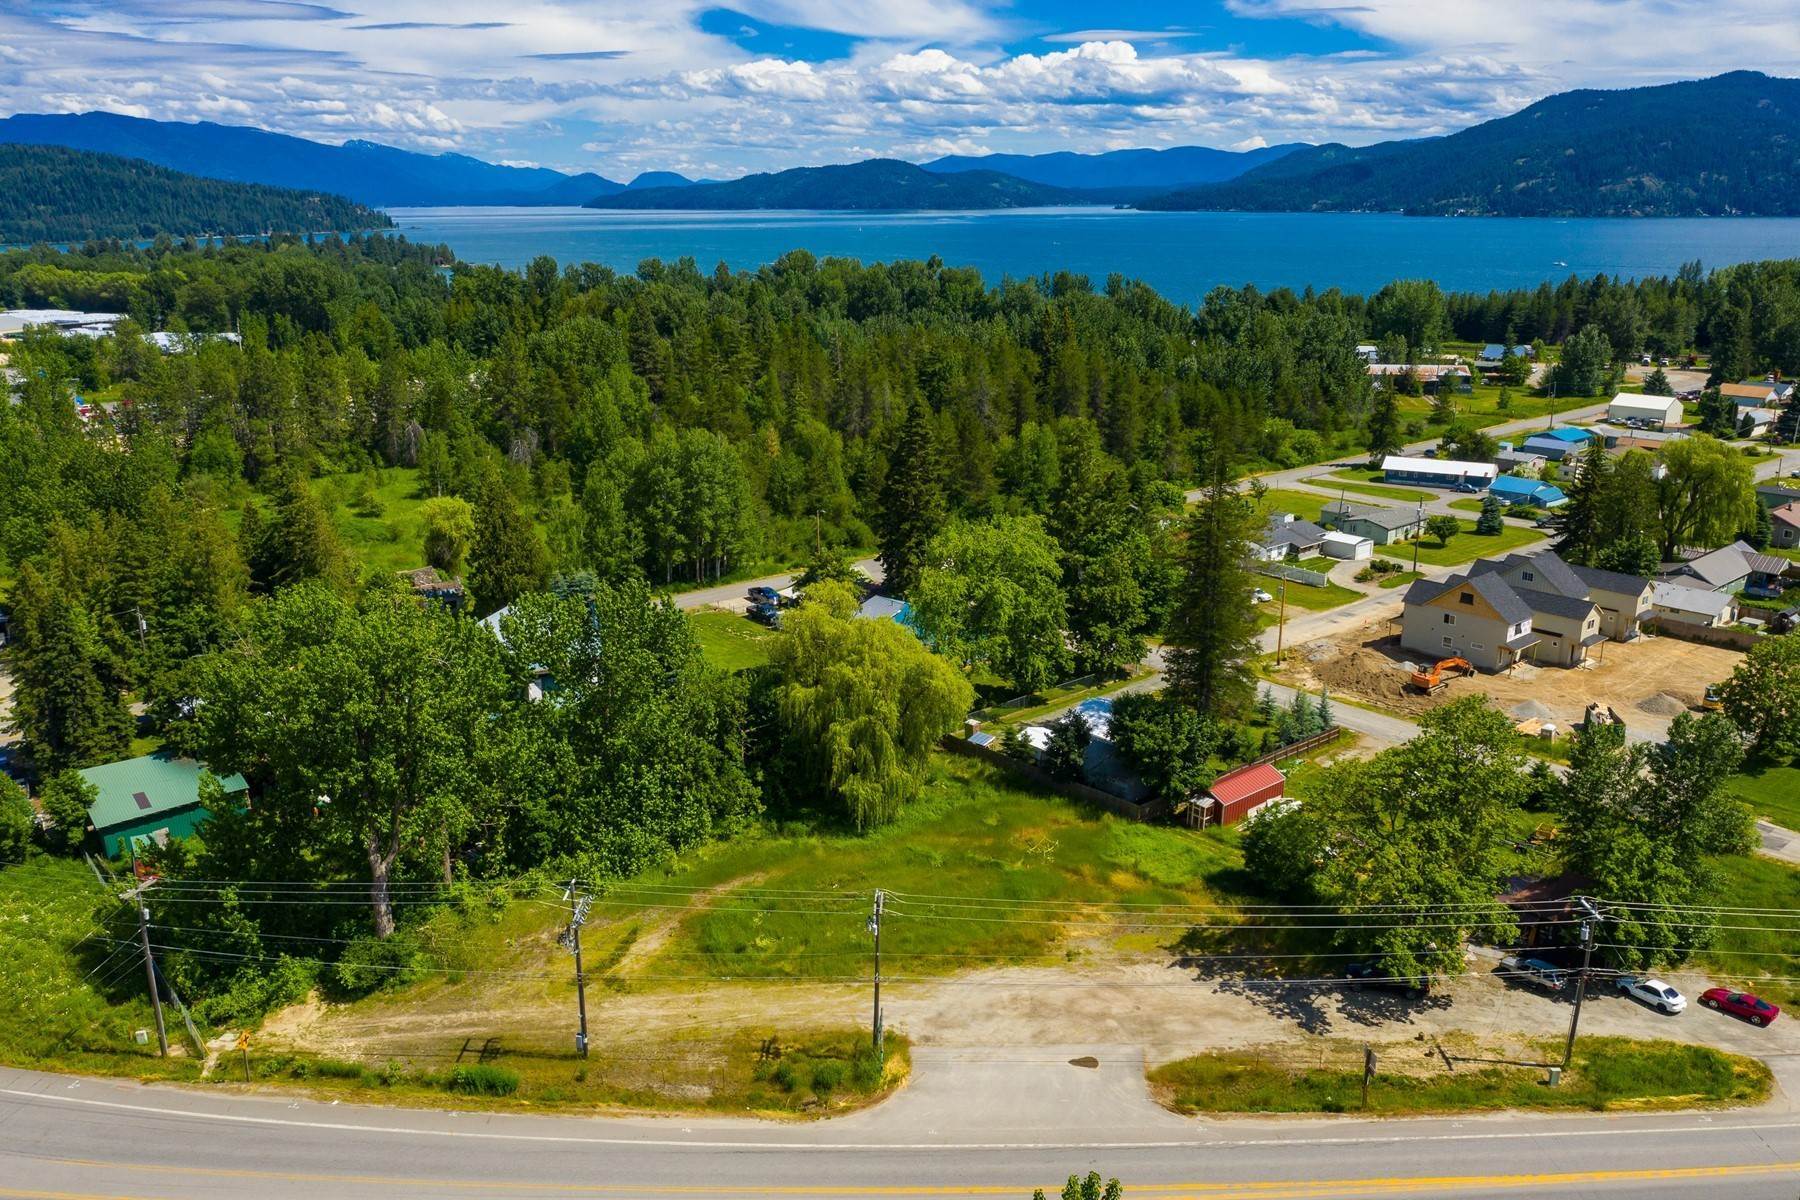 Land for Sale at Large Ponderay Lot with Massive Potential 31350 Highway 200 Sandpoint, Idaho 83864 United States